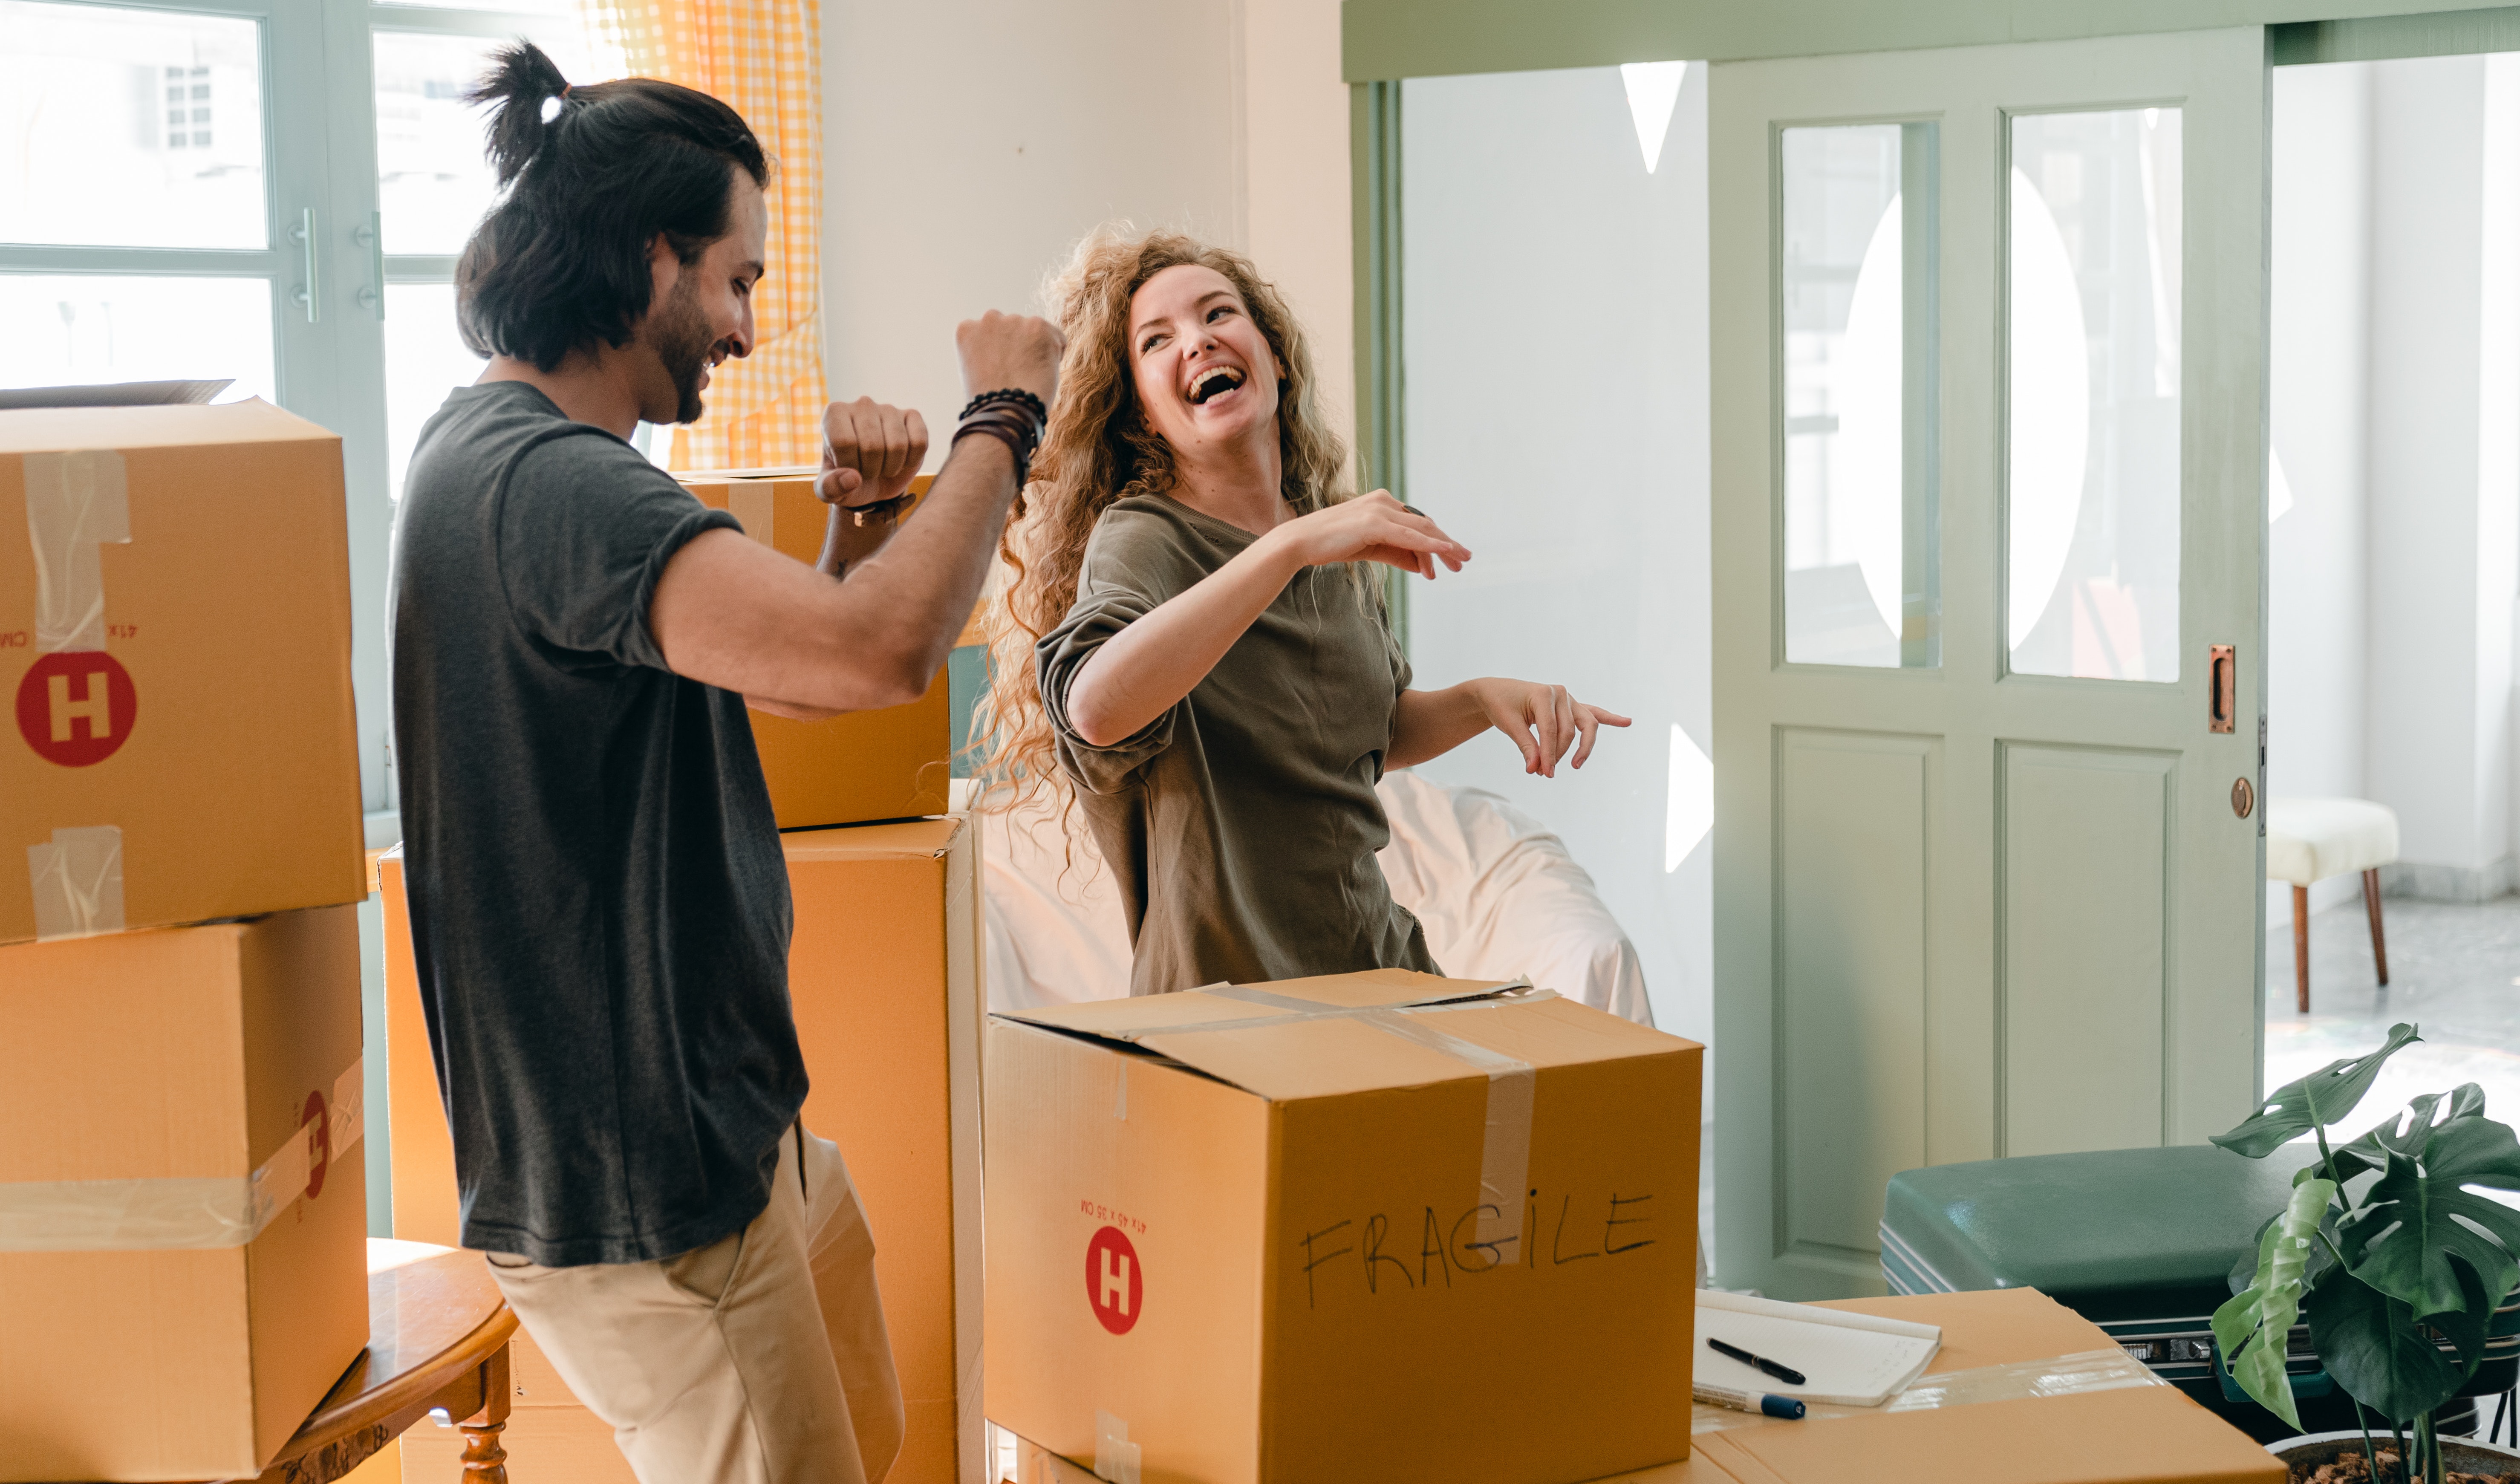 stock photo of couple unpacking sets of moving boxes in new home.